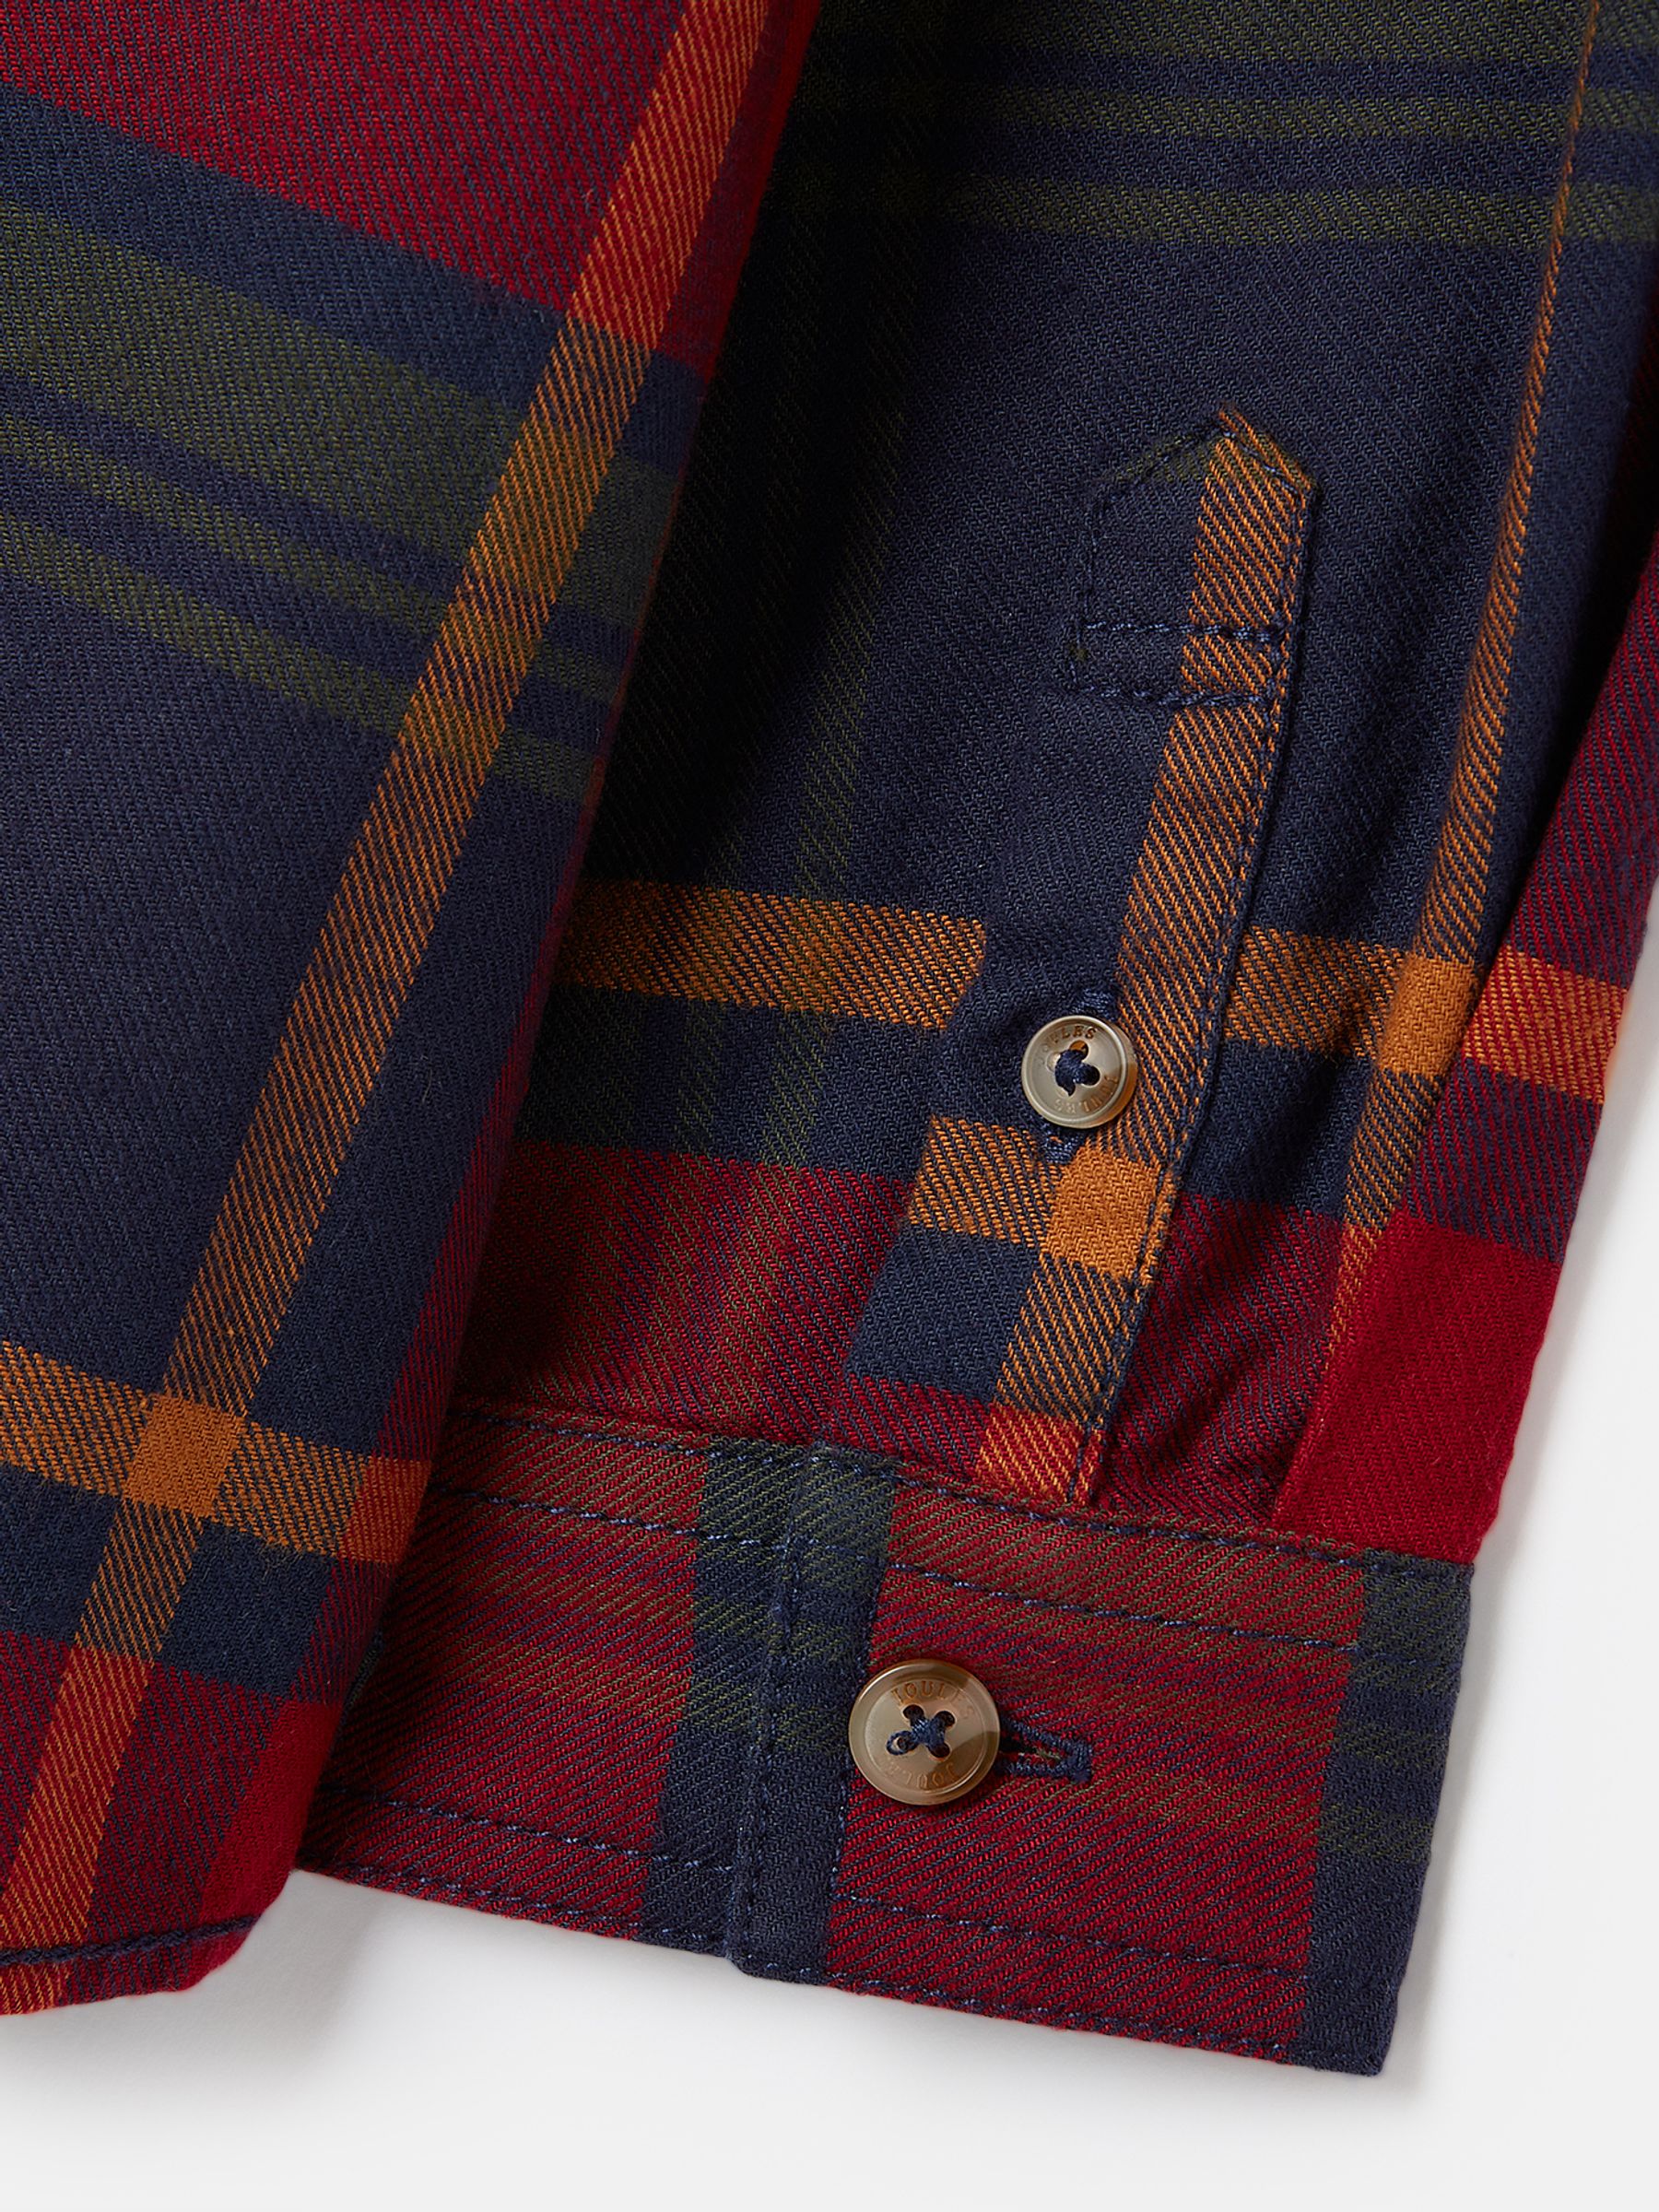 Buy Joules Buchannan Checked Brushed Shirt from the Joules online shop